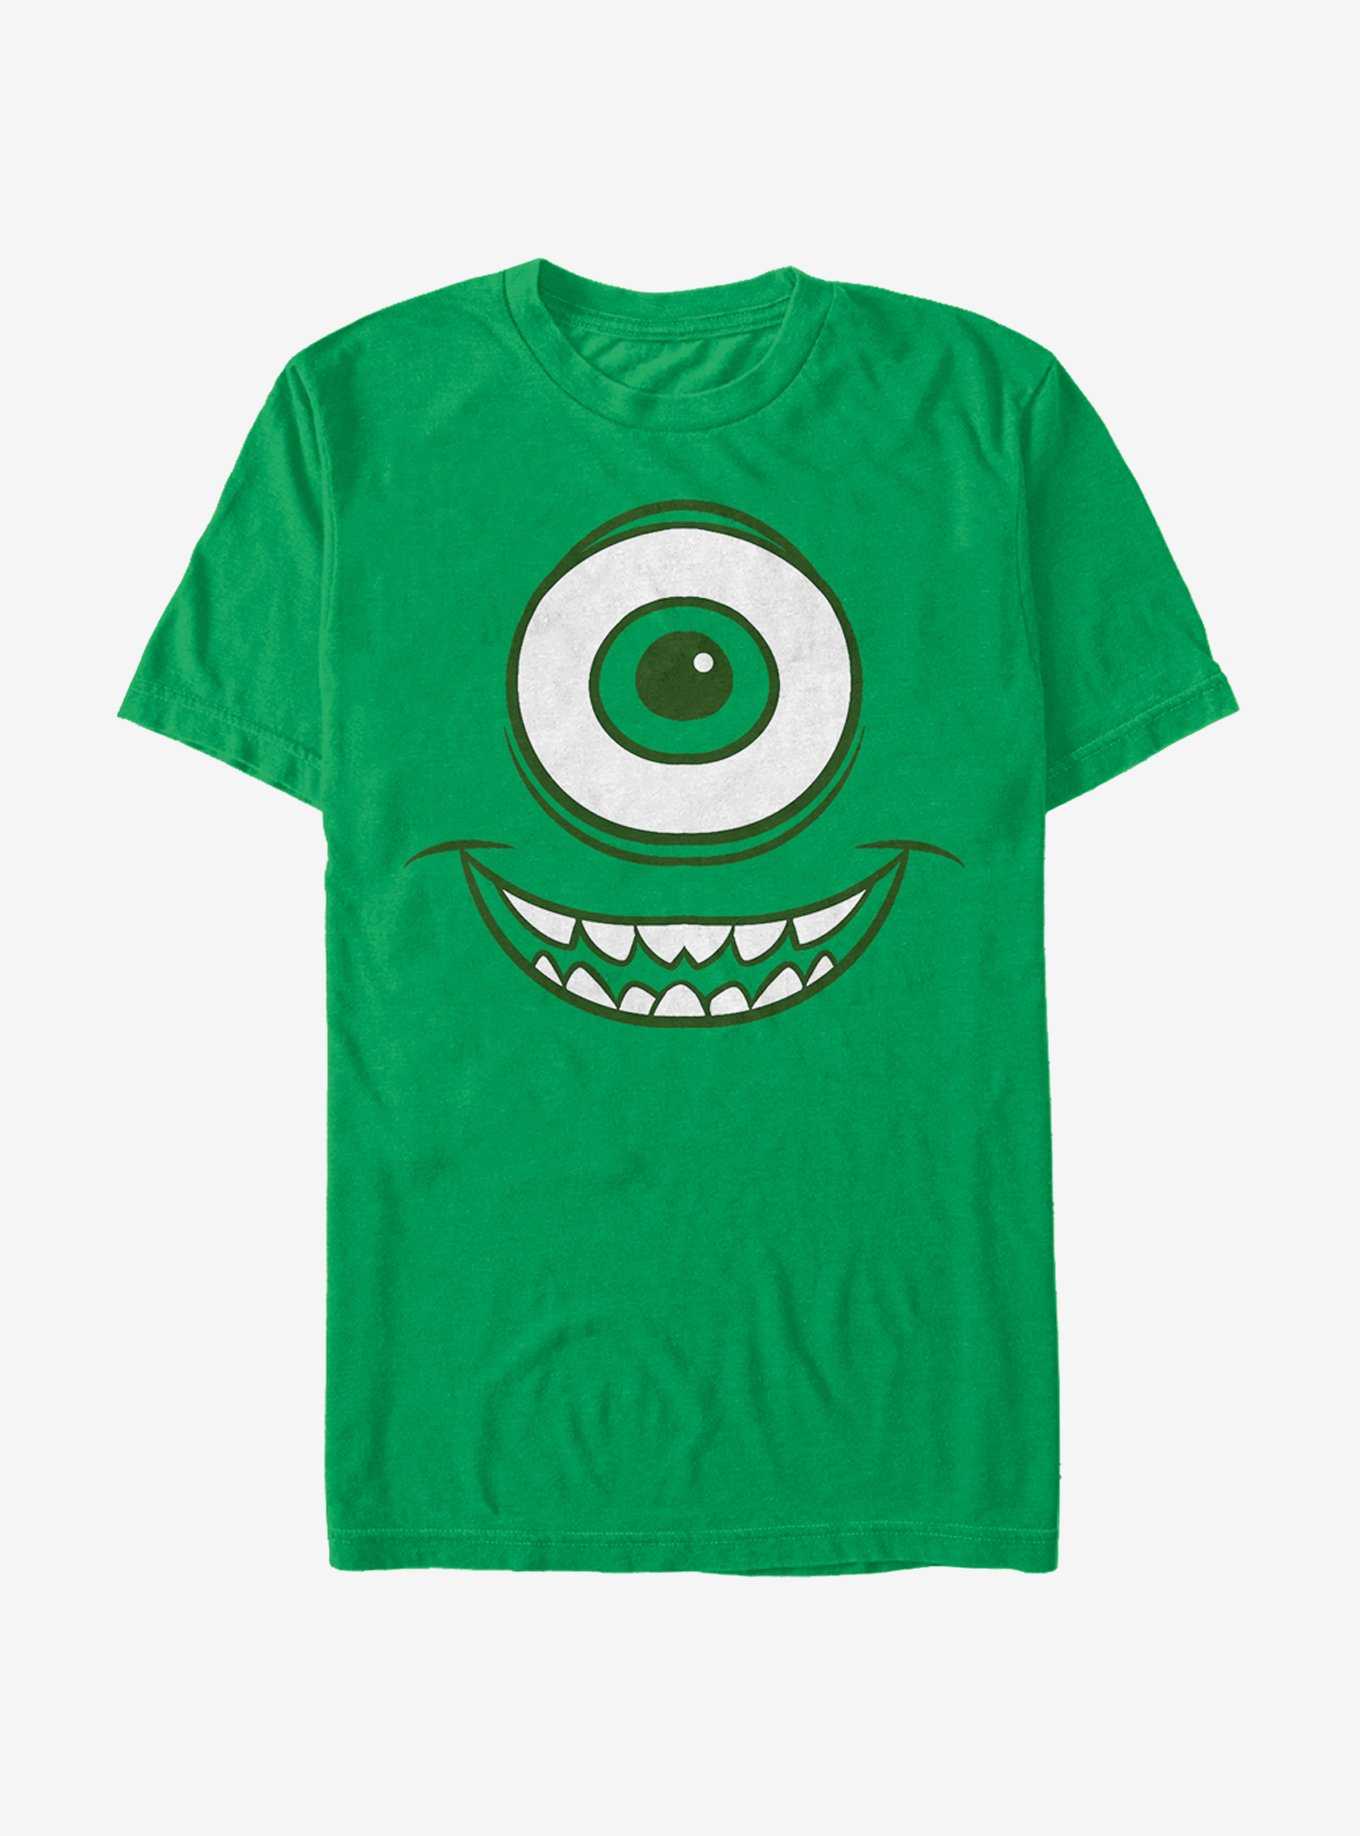  Disney and PIXAR's Monsters, Inc. Video Game Scare Squad  Premium T-Shirt : Clothing, Shoes & Jewelry